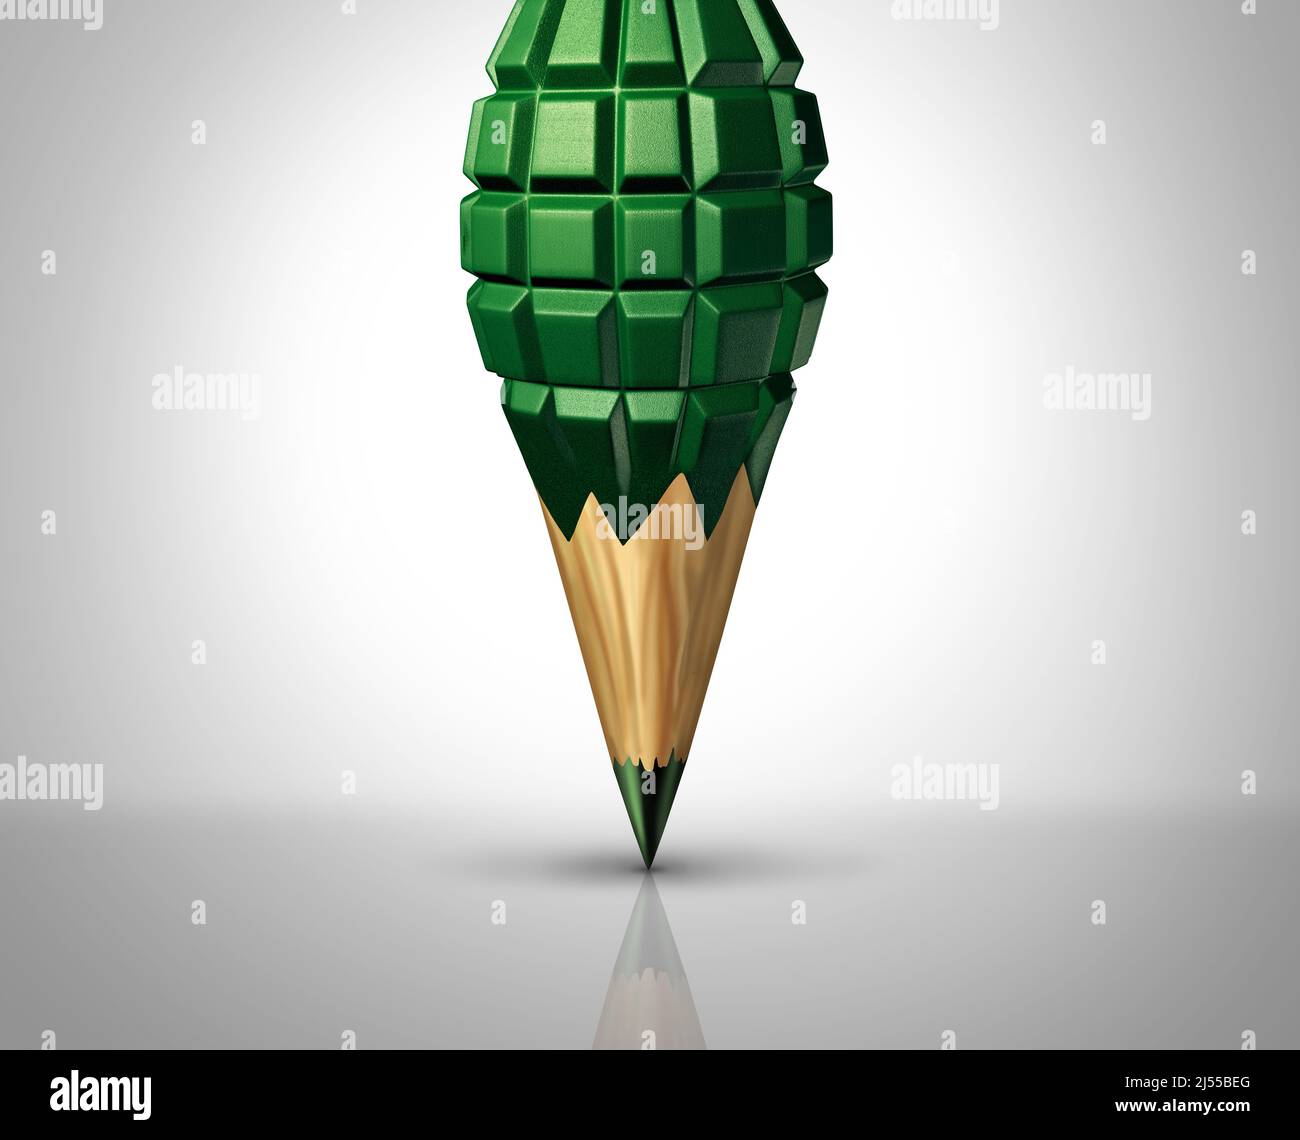 Military planning and army strategy or war concept as a pencil shaped as a grenade representing diplomacy or diplomatic strategy to avoid wars. Stock Photo